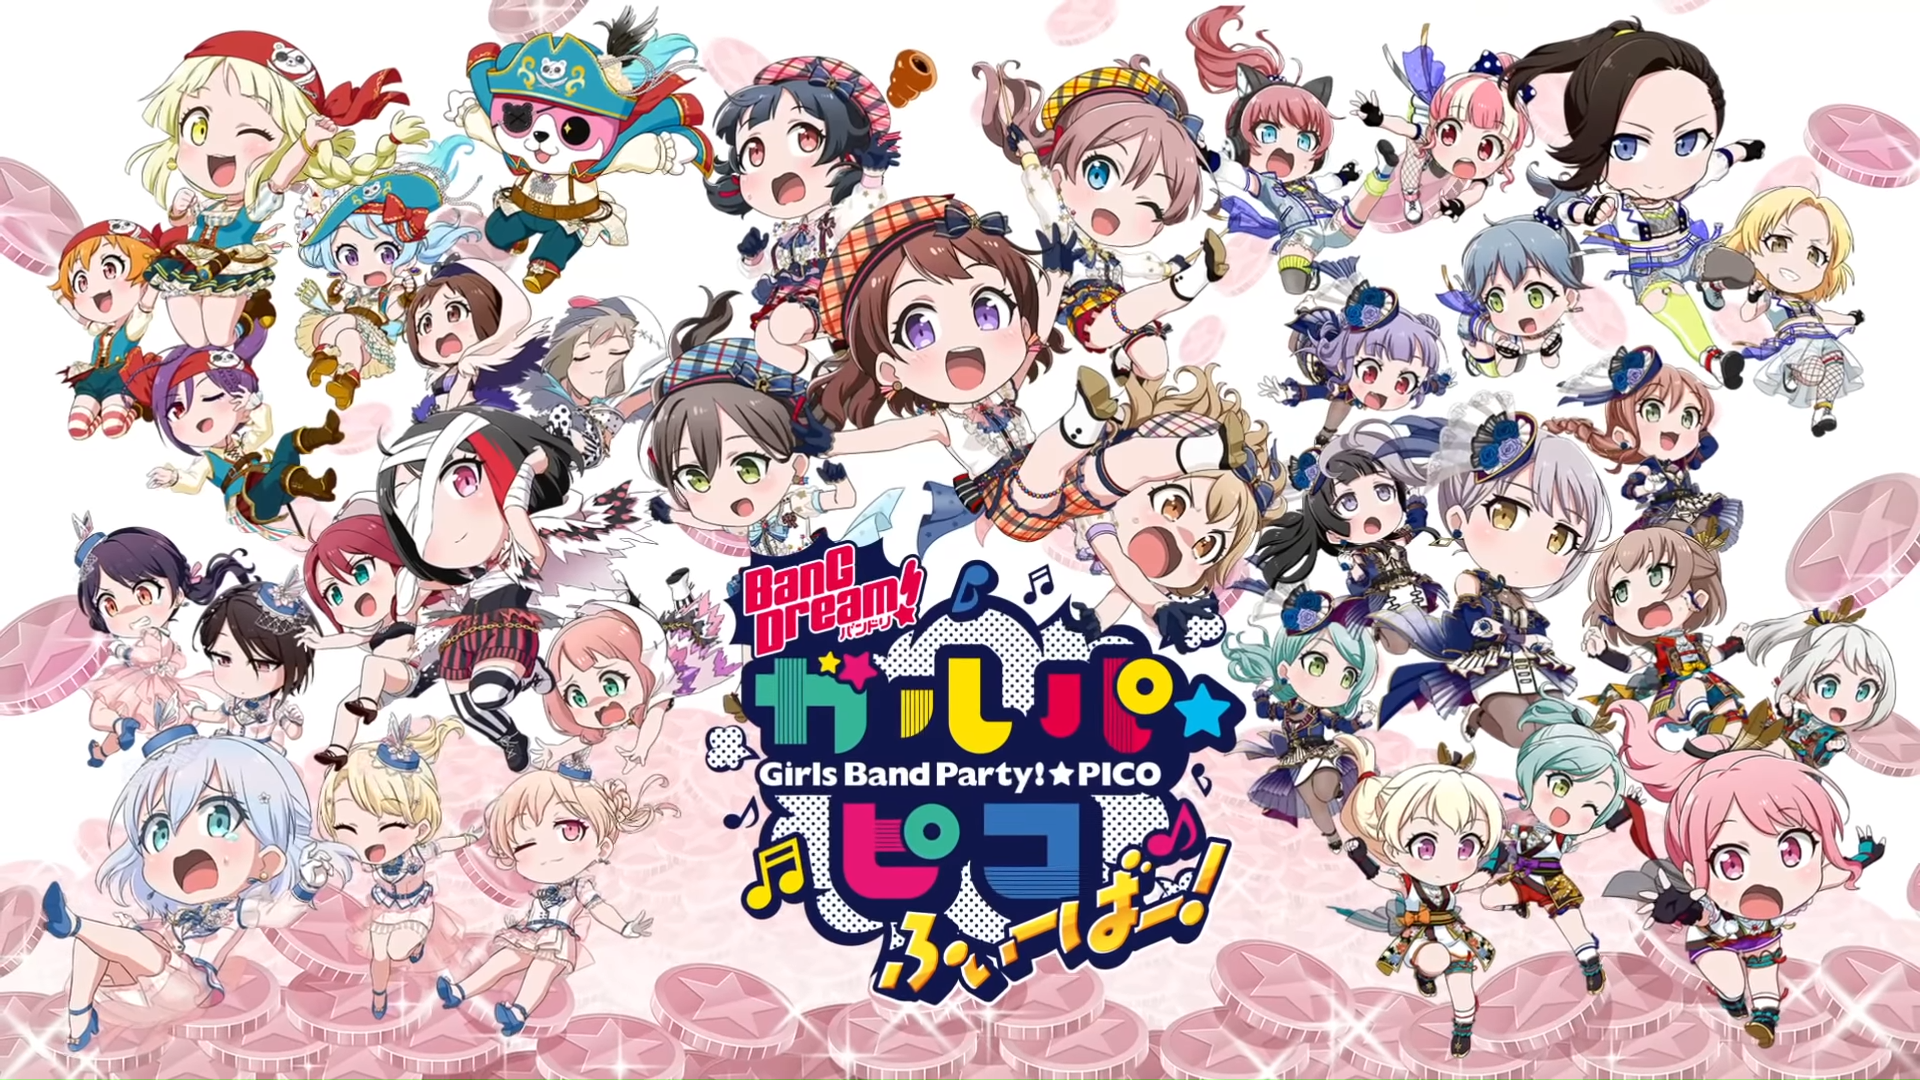 BanG Dream Girls Band Party - The fun-filled antics of the chibi bands are  back! Join us for BanG Dream! Girls Band Party!☆PICO FEVER! this coming  Thursday Oct 7th, 22:00 JST, with